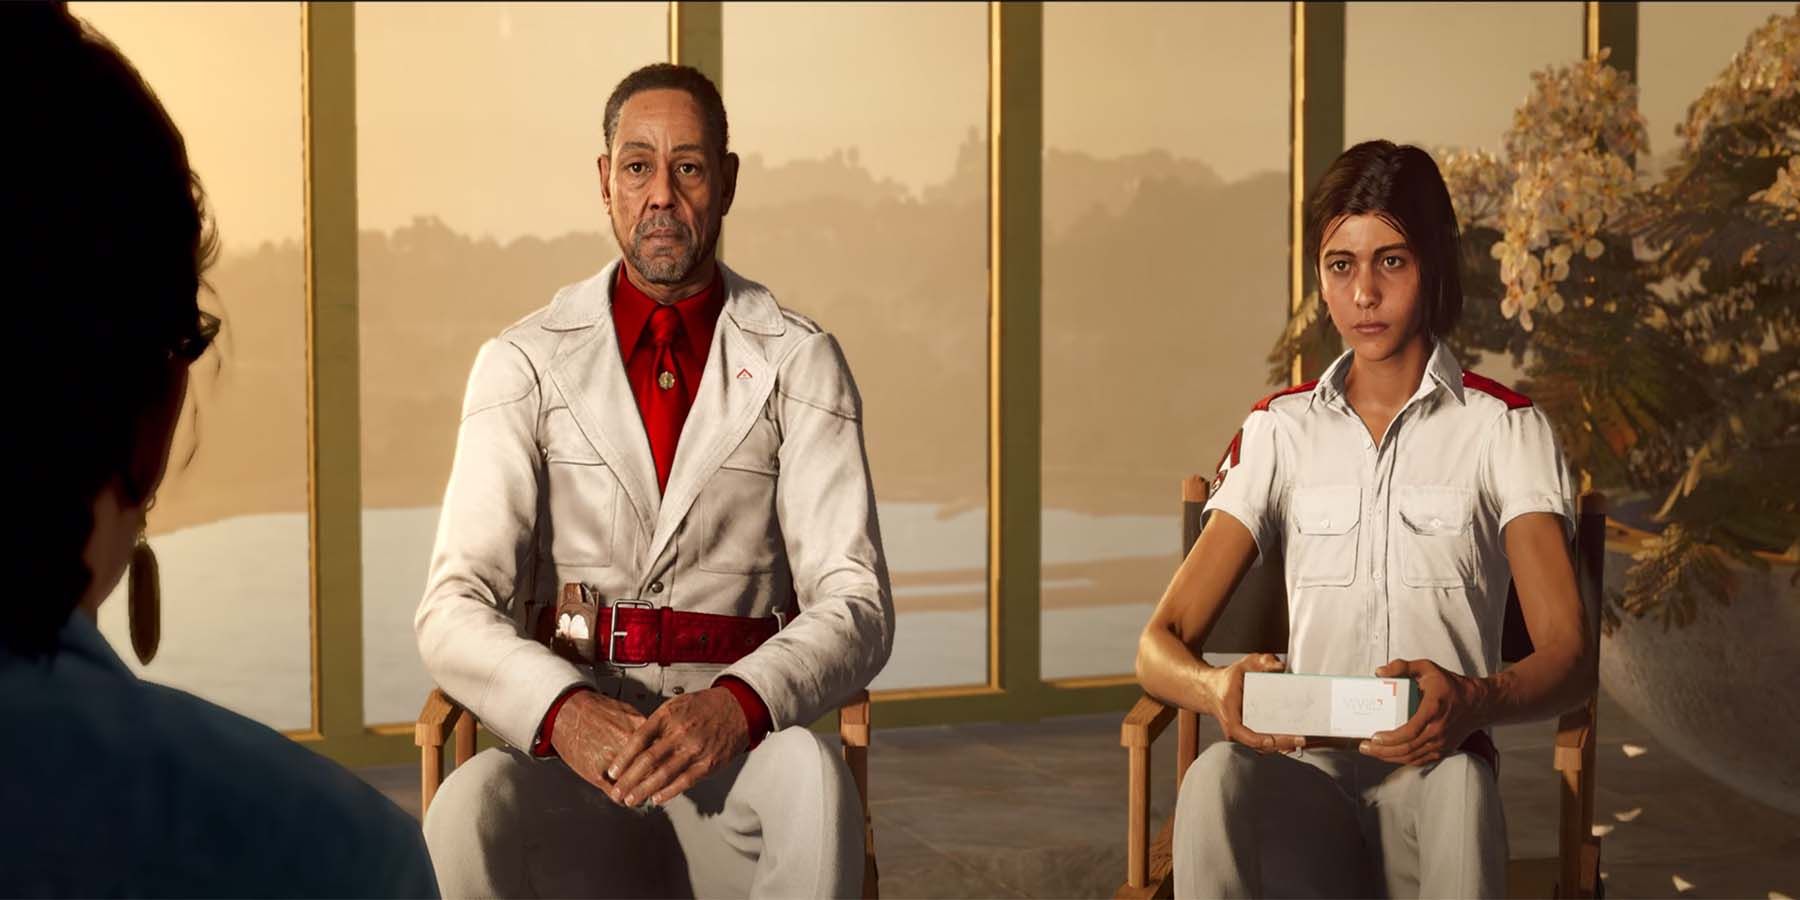 Far Cry 6 Story Trailer Offers Closer Look at Anton Castillo and Dani Rojas